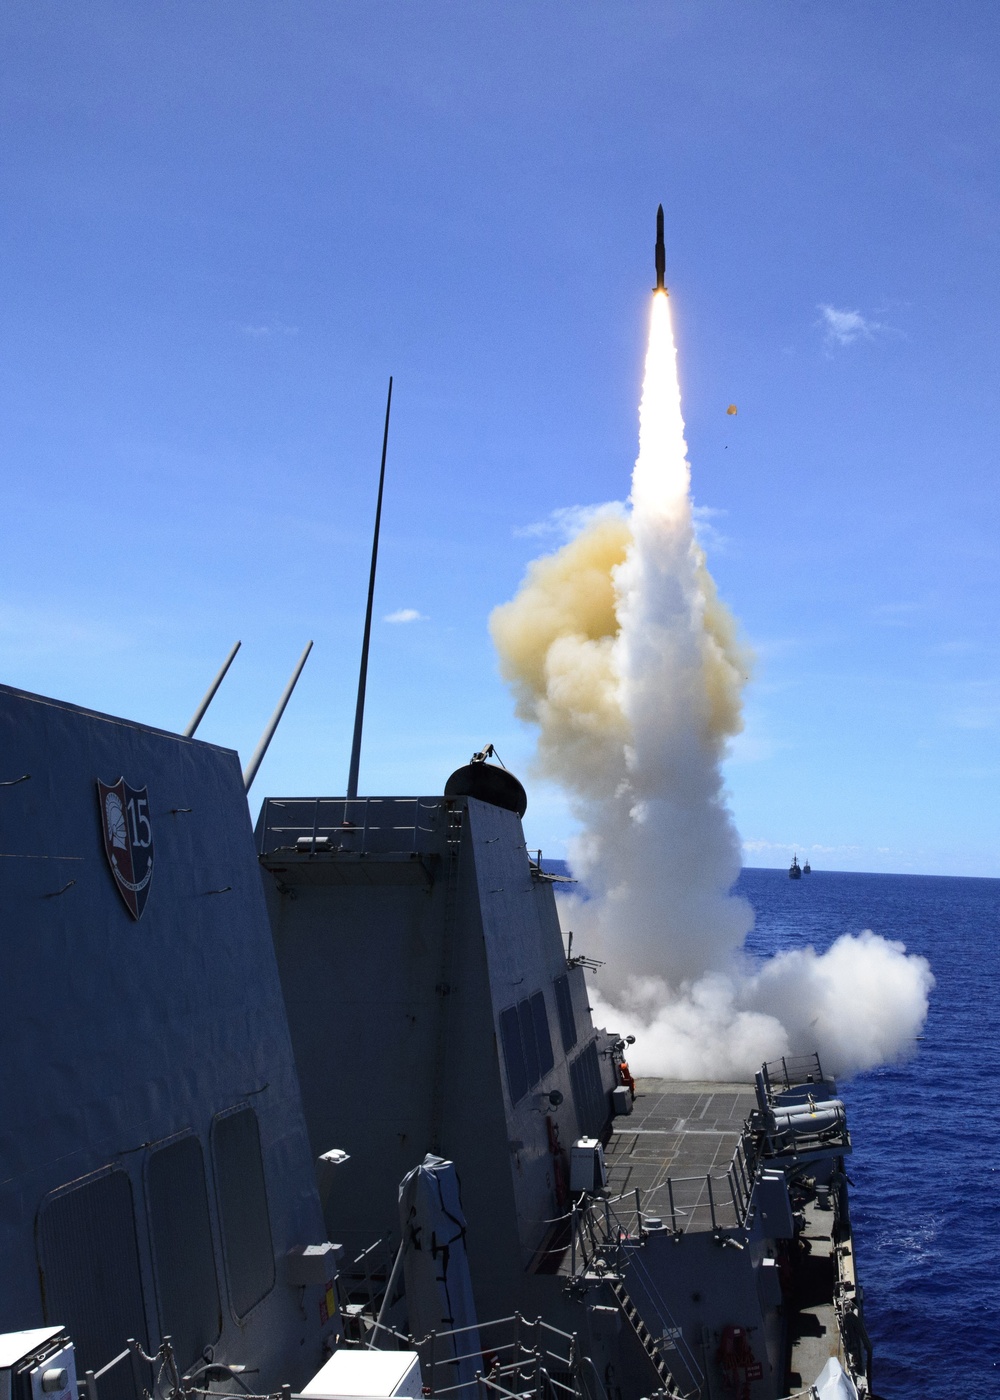 USS Mustin (DDG 89) launches SM-2 rocket during MISSILEX exercise for MultiSail 18